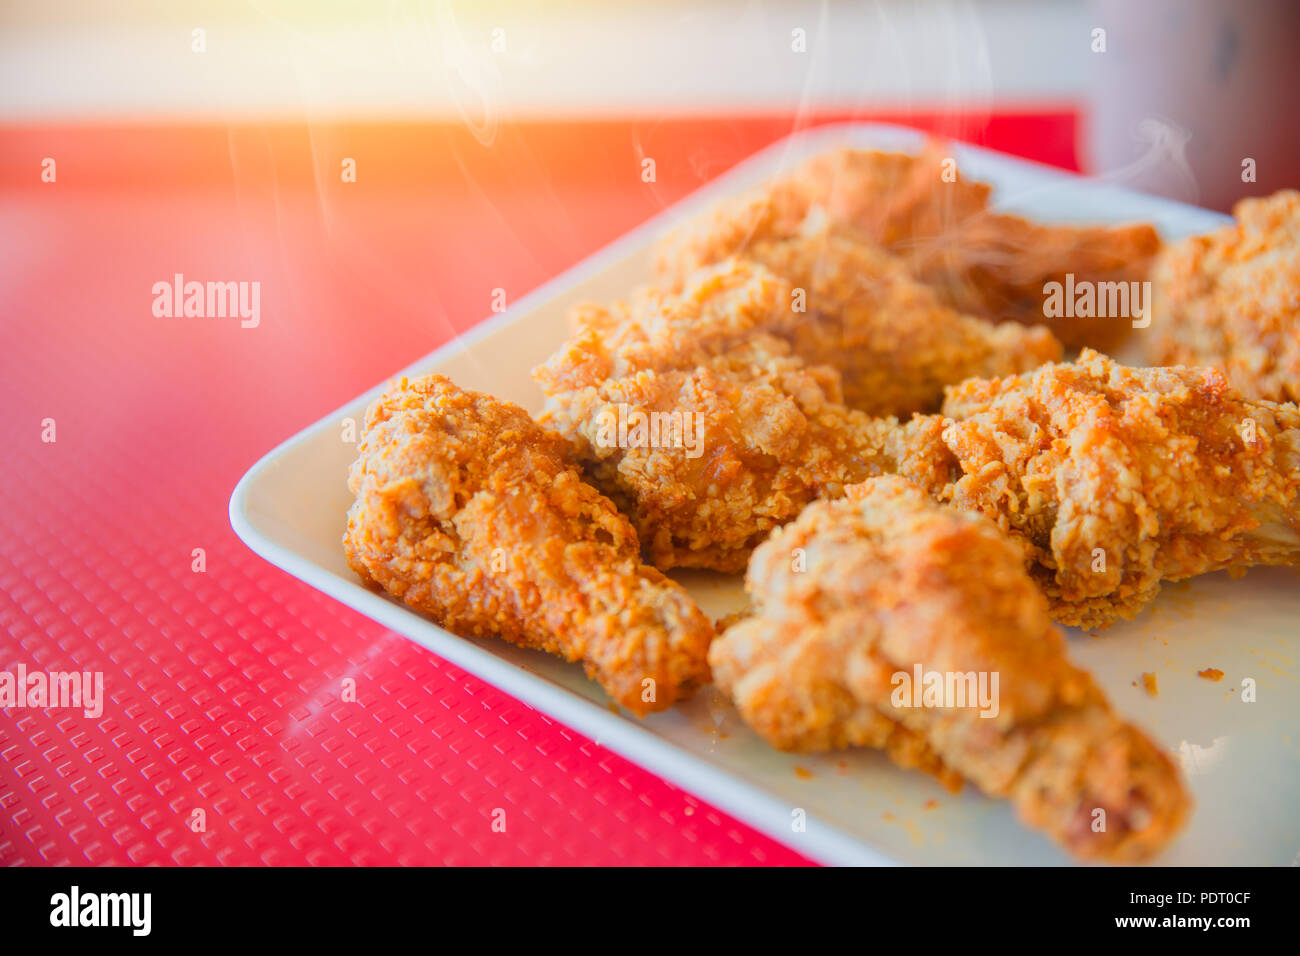 Hot Kentucky style fried chicken yummy tasty happy meal of fast food american pop culture Stock Photo